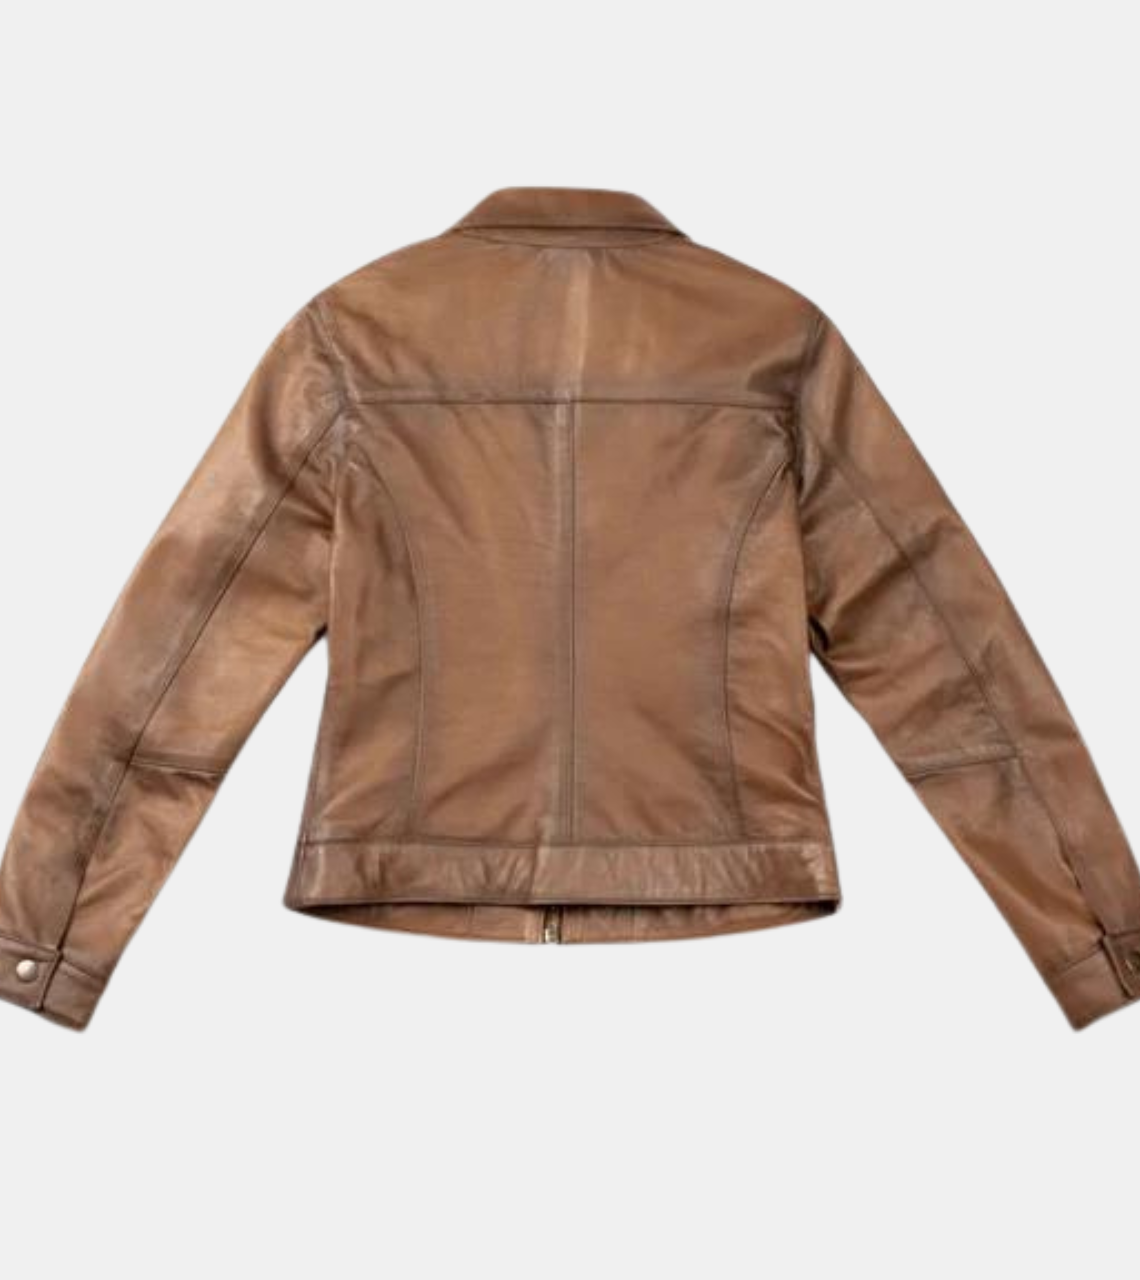  Women's Brown Leather Jacket